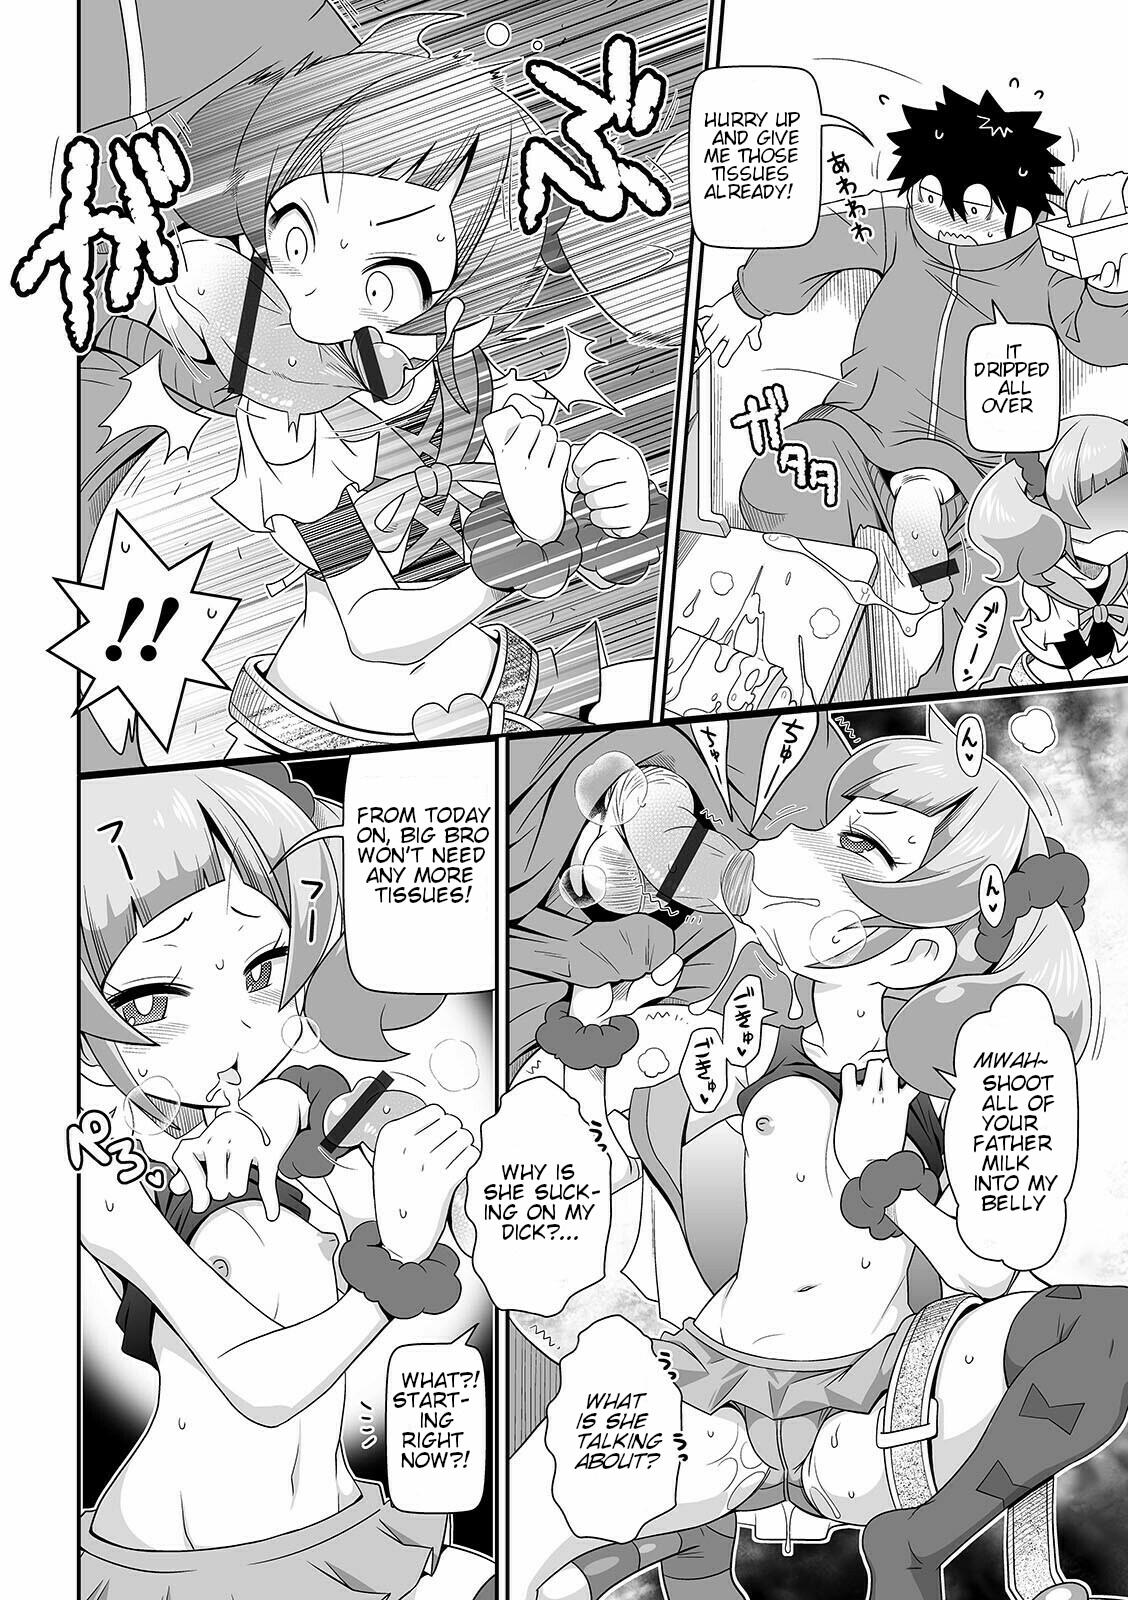 Heels Imouto Tissue | Lil Sis' Tissues - Original Camwhore - Page 6